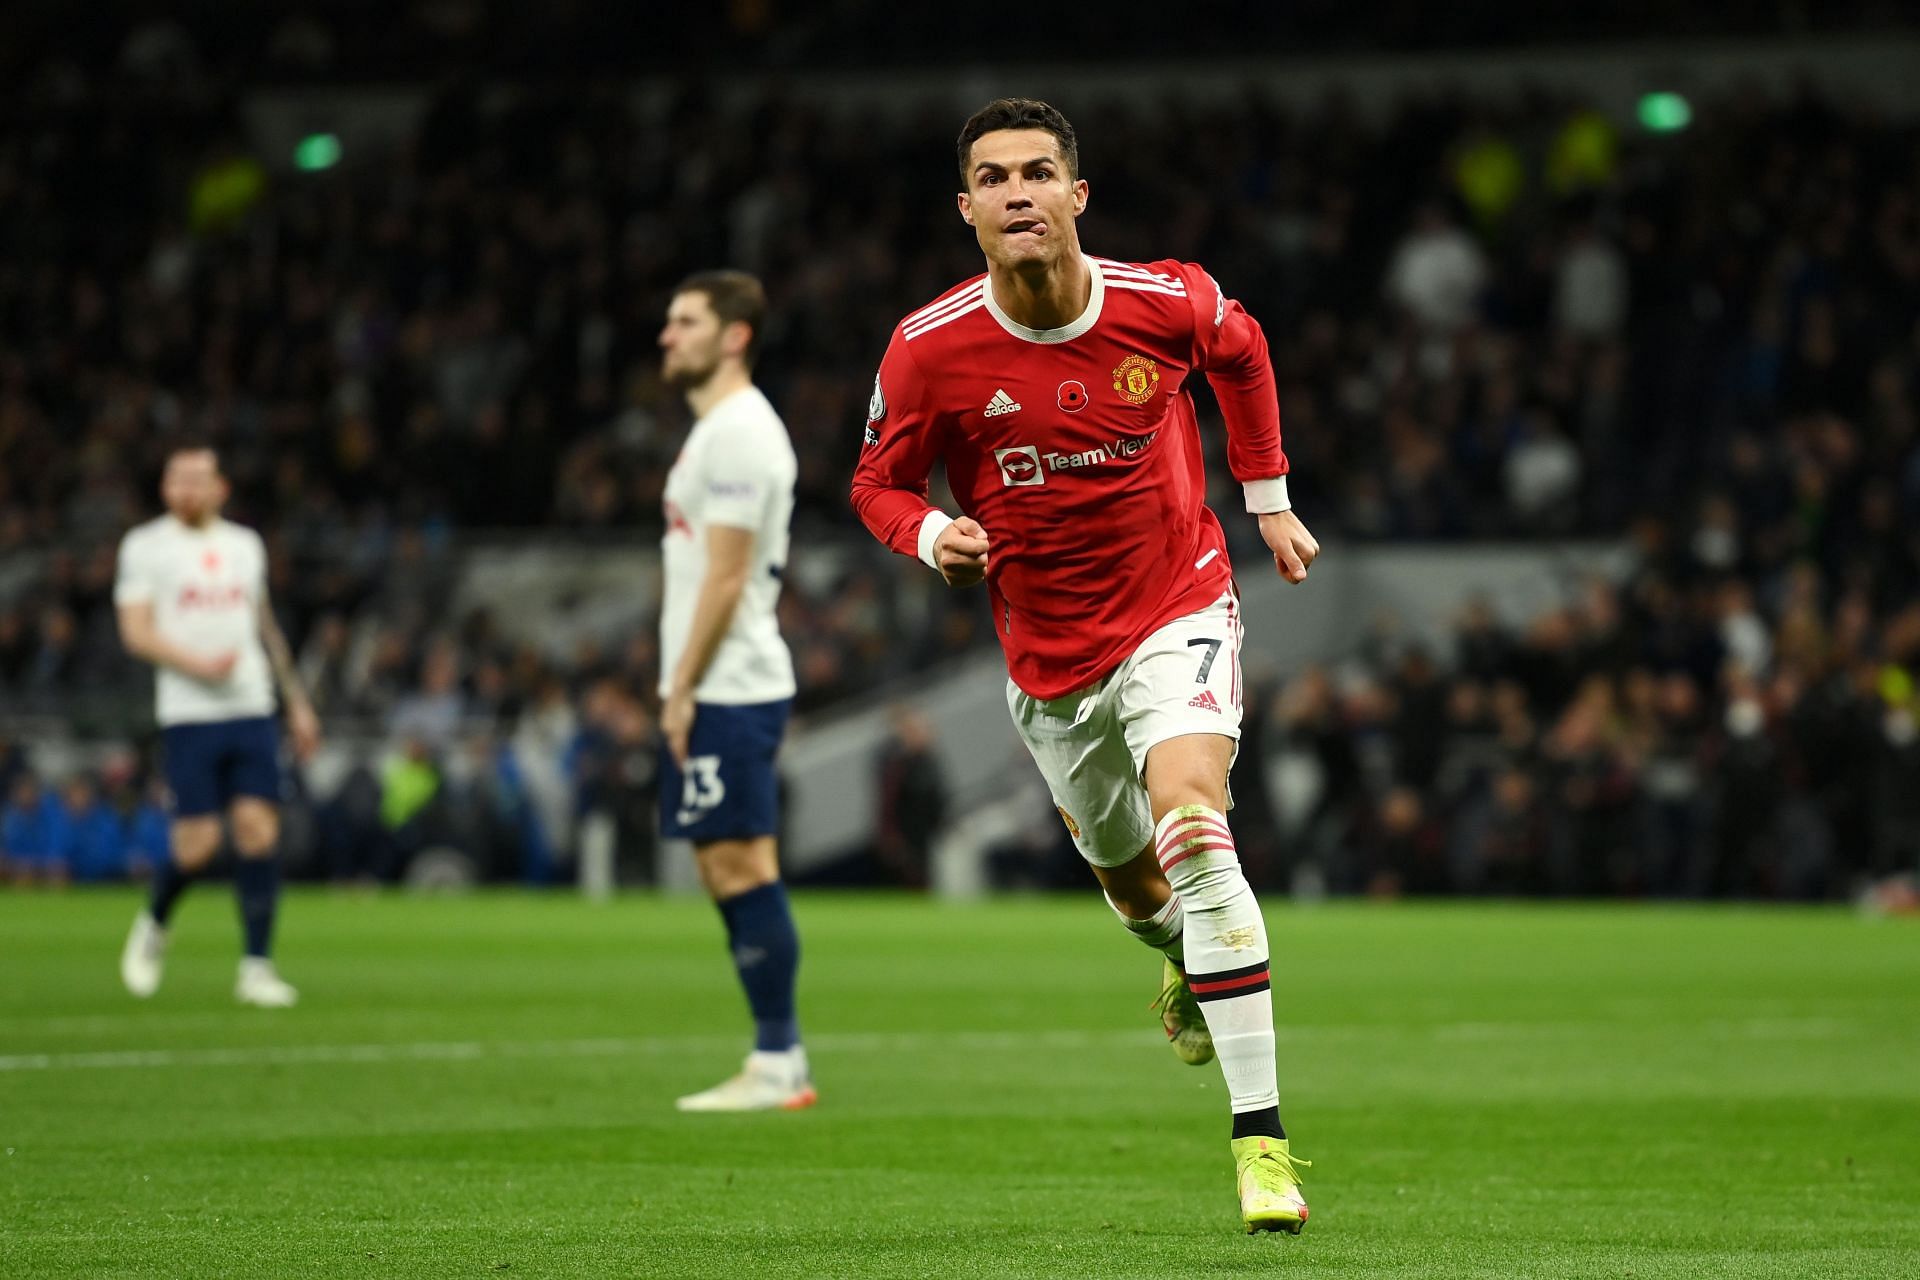 Tottenham Hotspur take on Manchester United this weekend